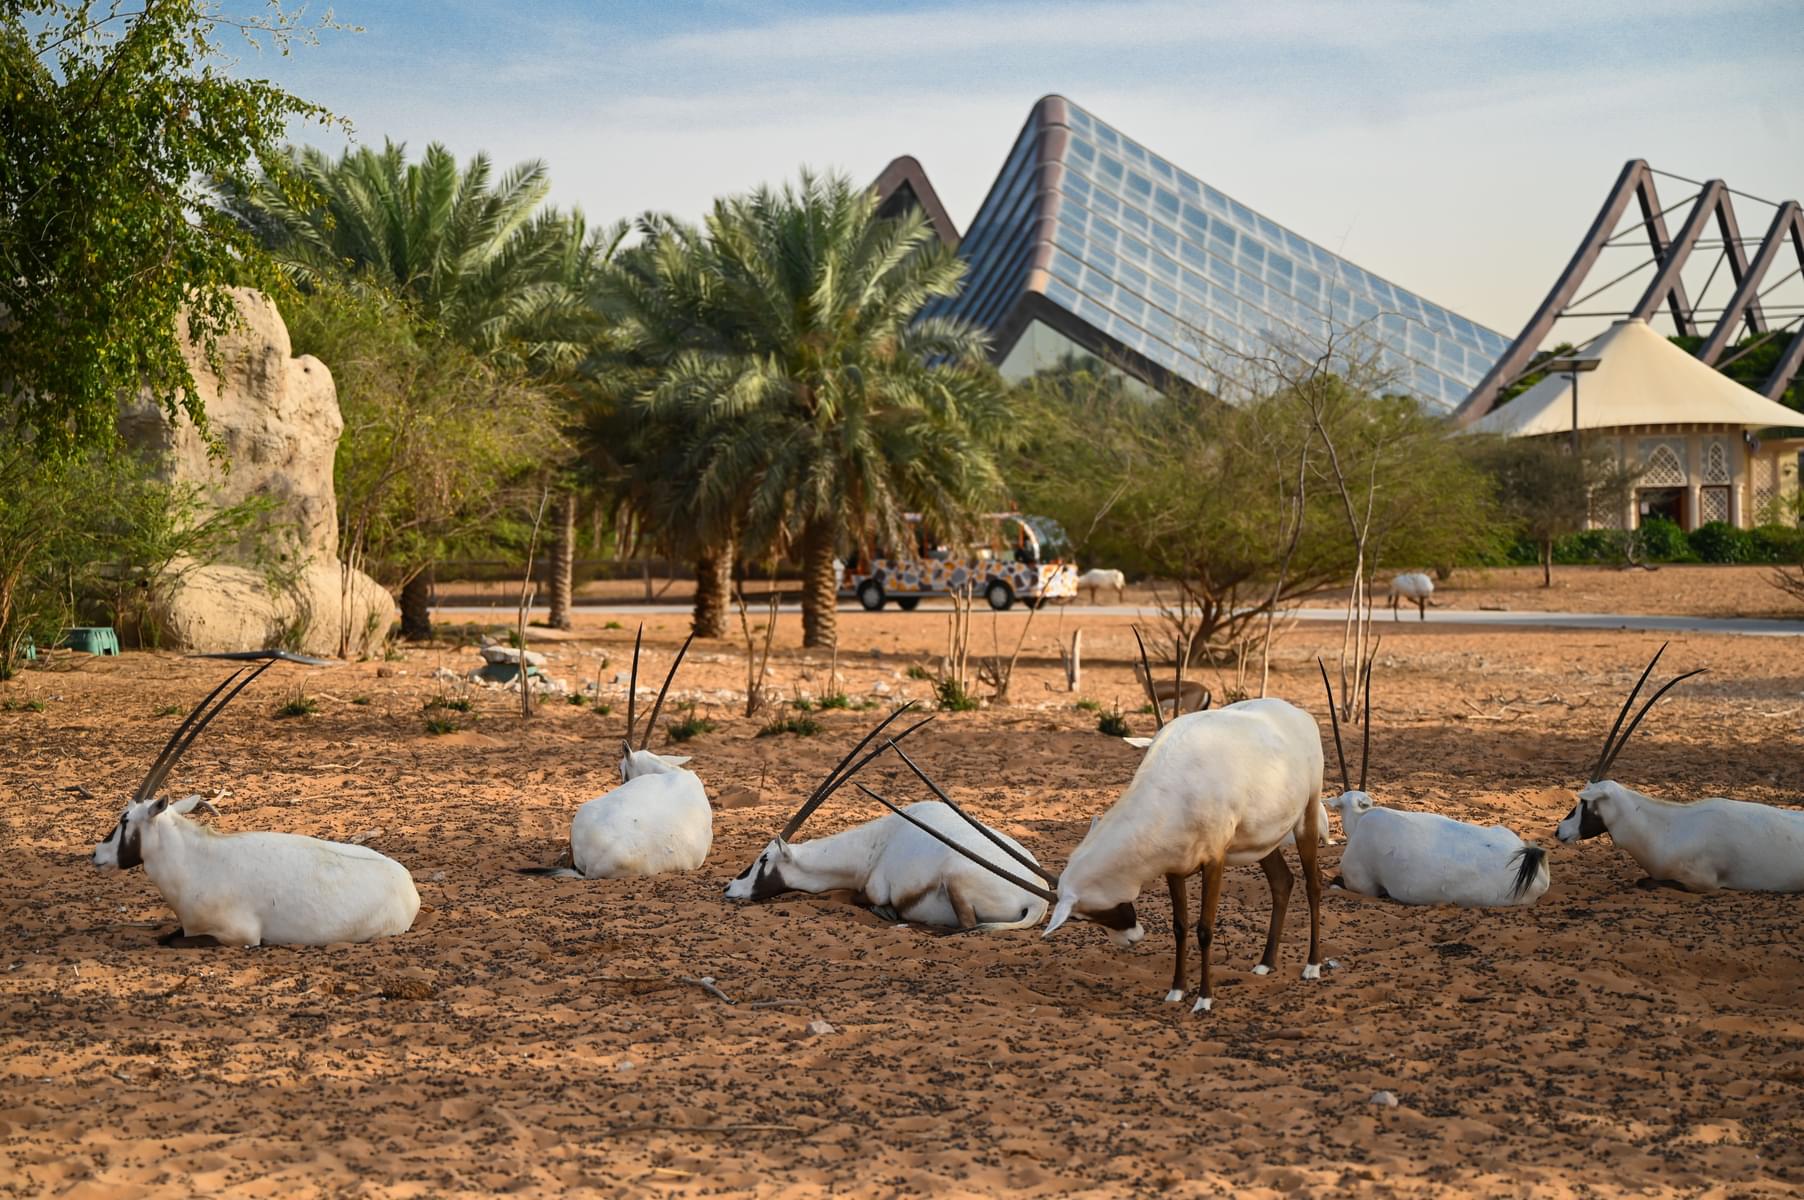 Tips For Visiting Al Ain Zoo